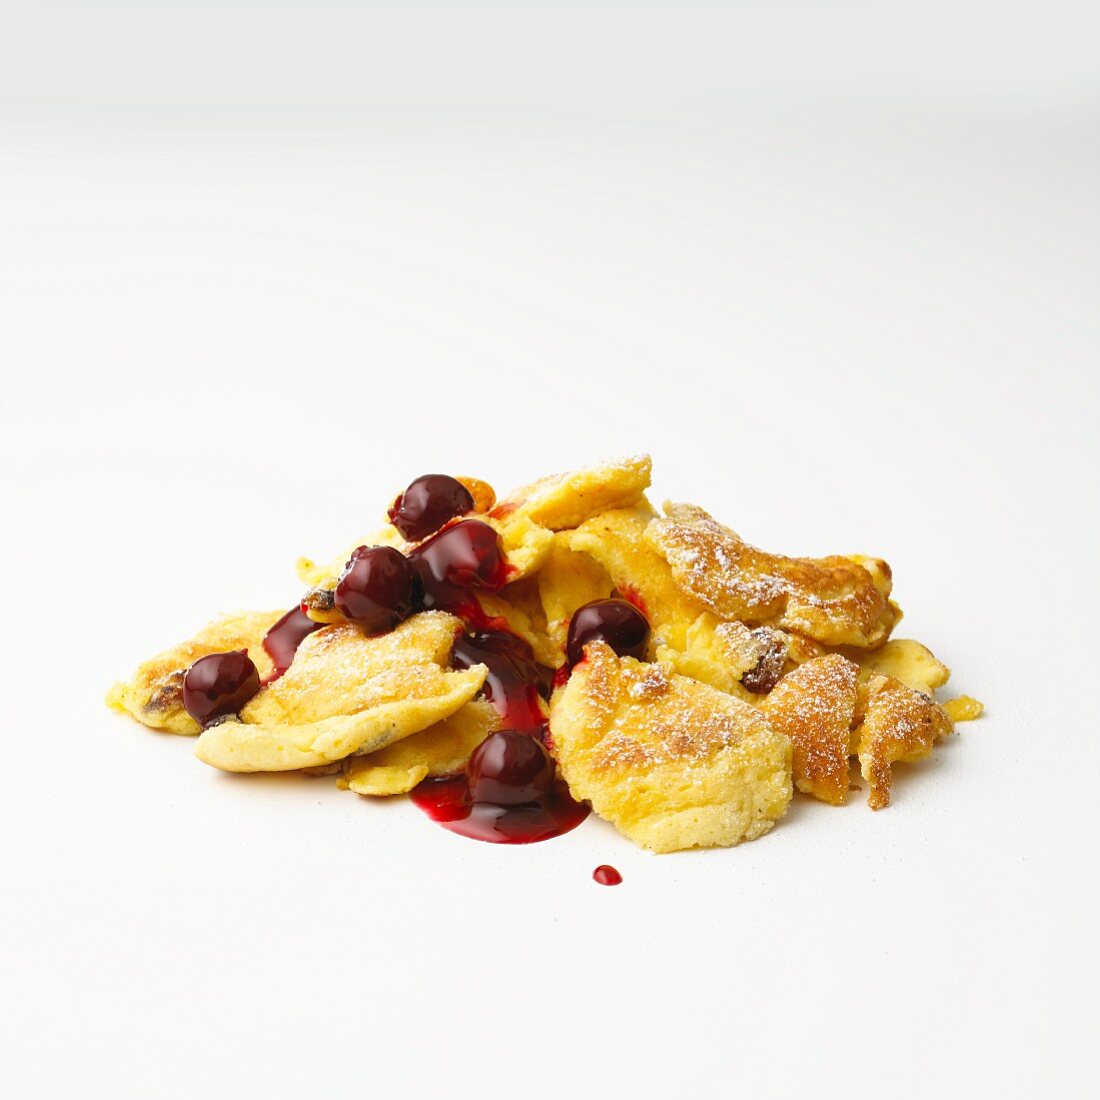 Kaiserschmarren (sweet cut up pancakes) with cherry compote in front of white background